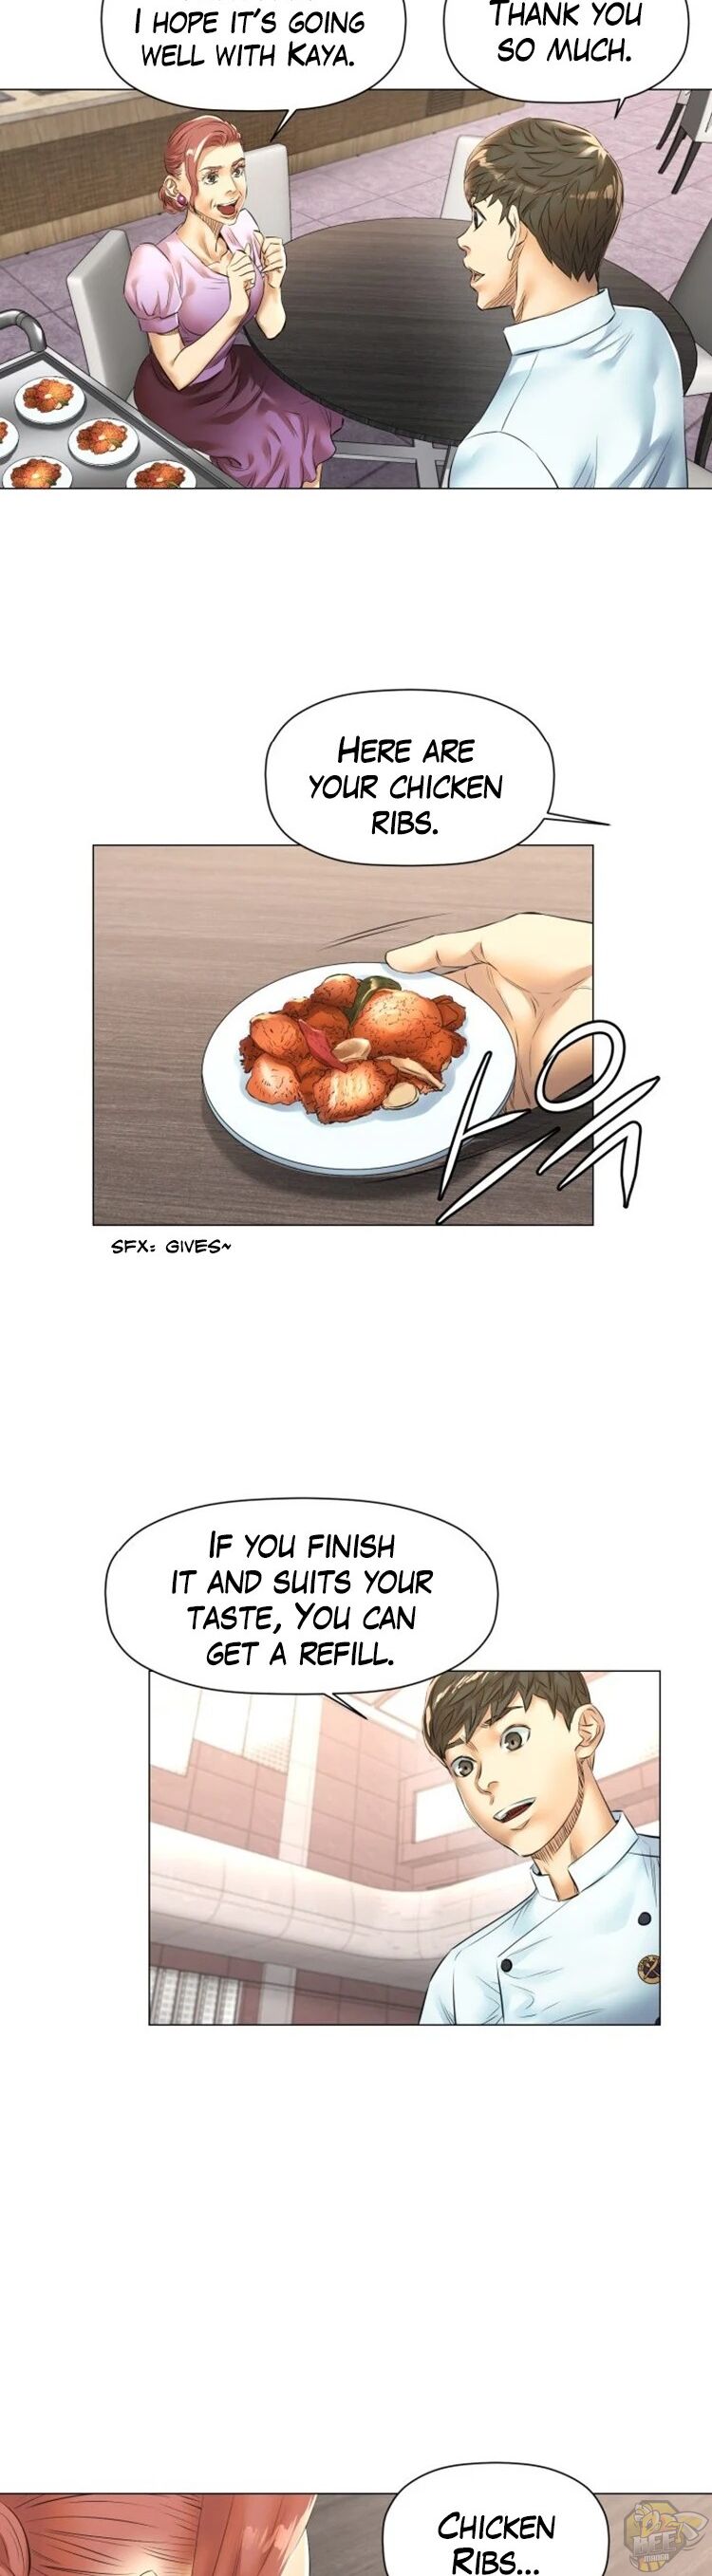 God Of Cooking Chapter 34 - MyToon.net